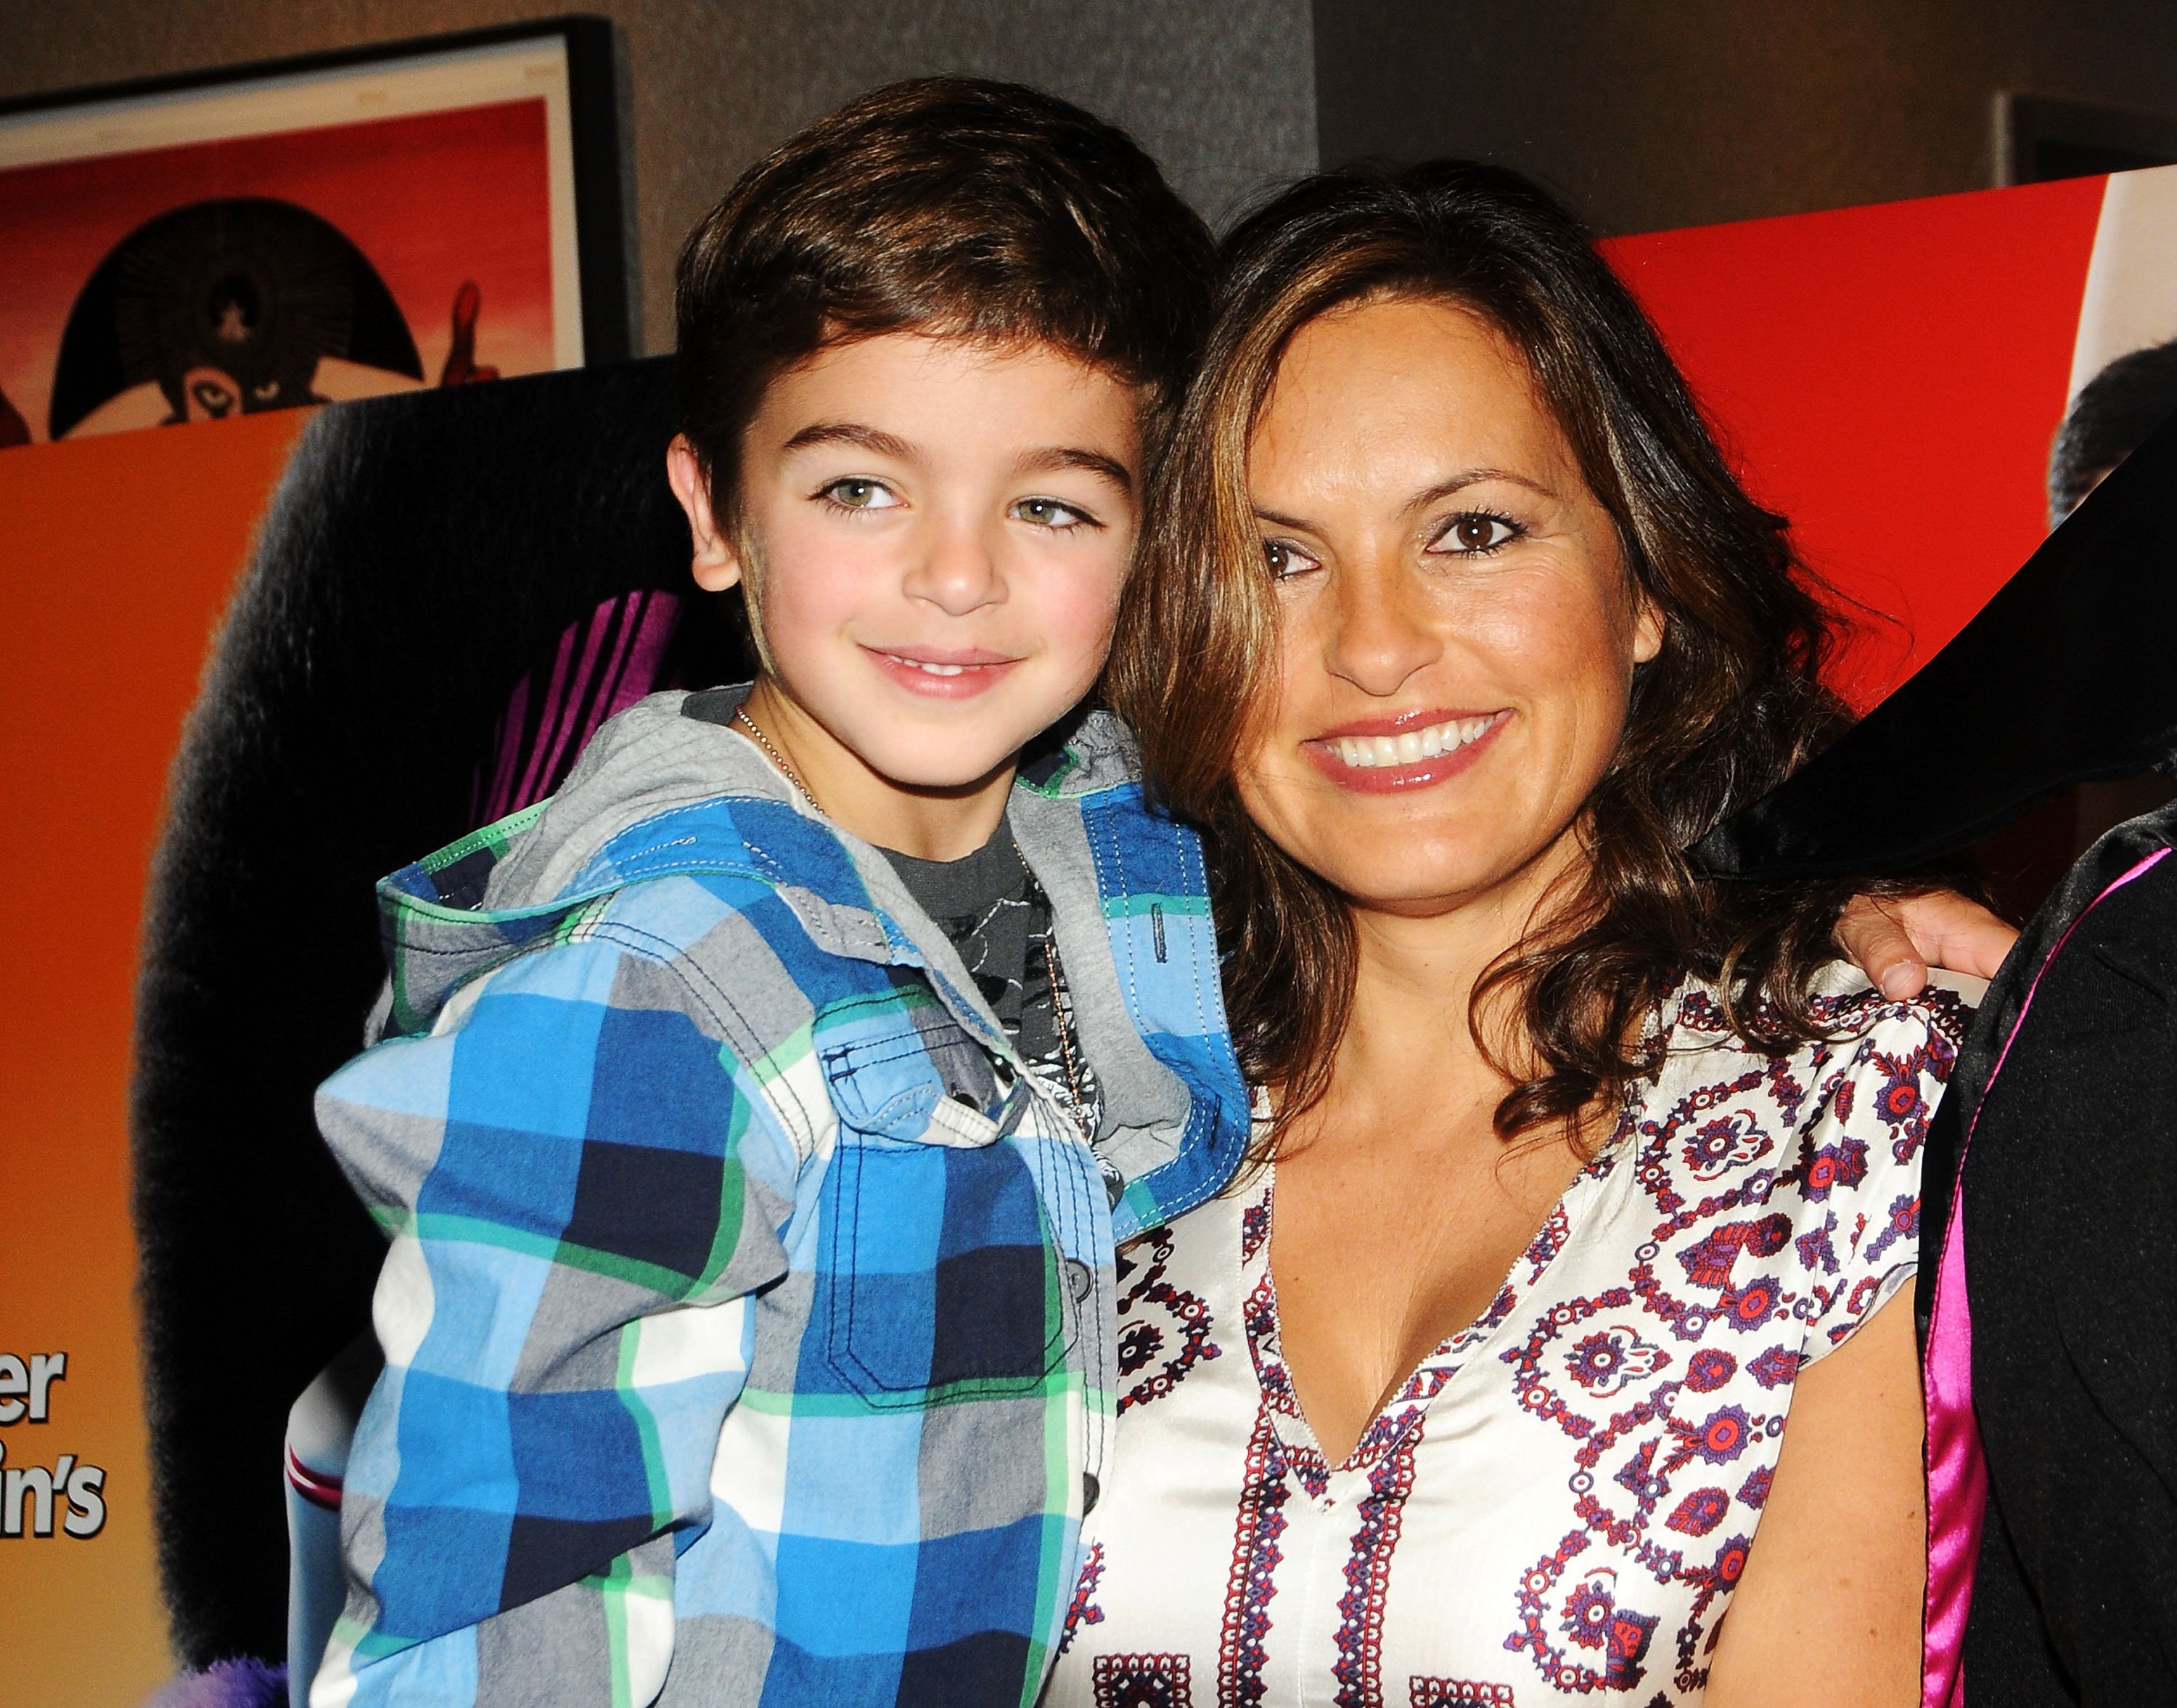  Mariska Hargitay and August at the "Hotel Transylvania" New York Premiere at the Academy Theater at Lighthouse International on September 22, 2012. | Photo: Getty Images